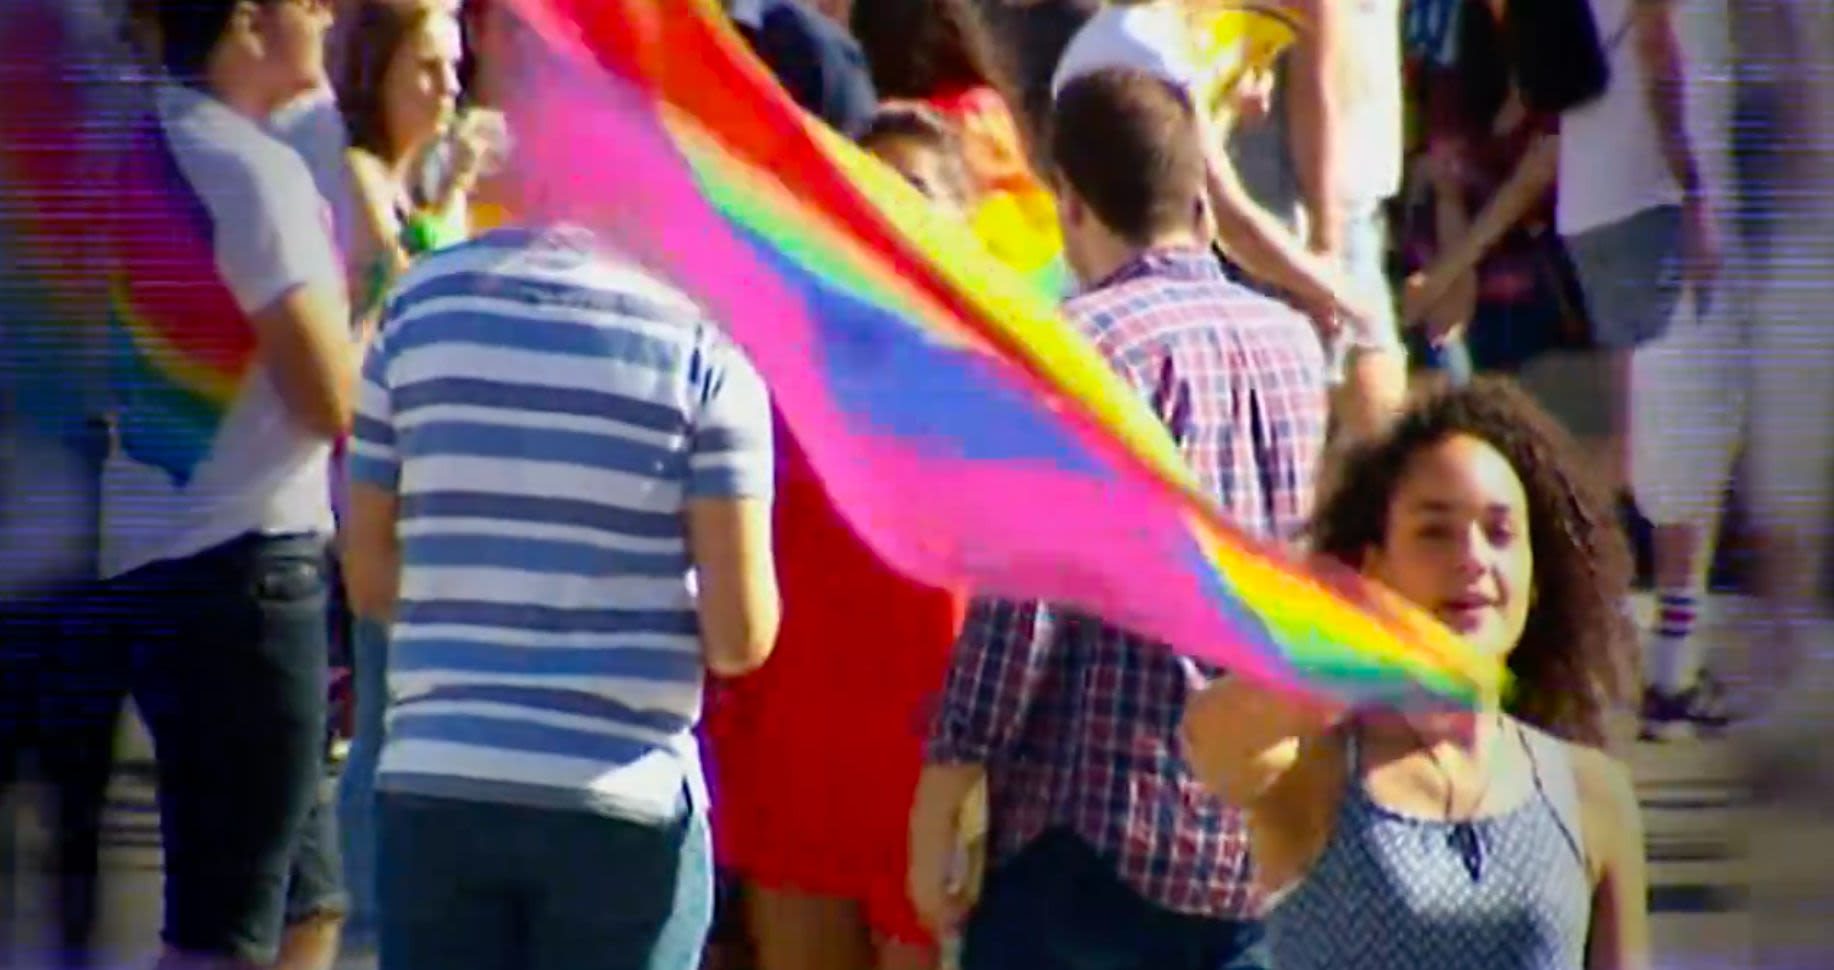 In a crowd of people, a woman with curly hair is waving the pride flag. 